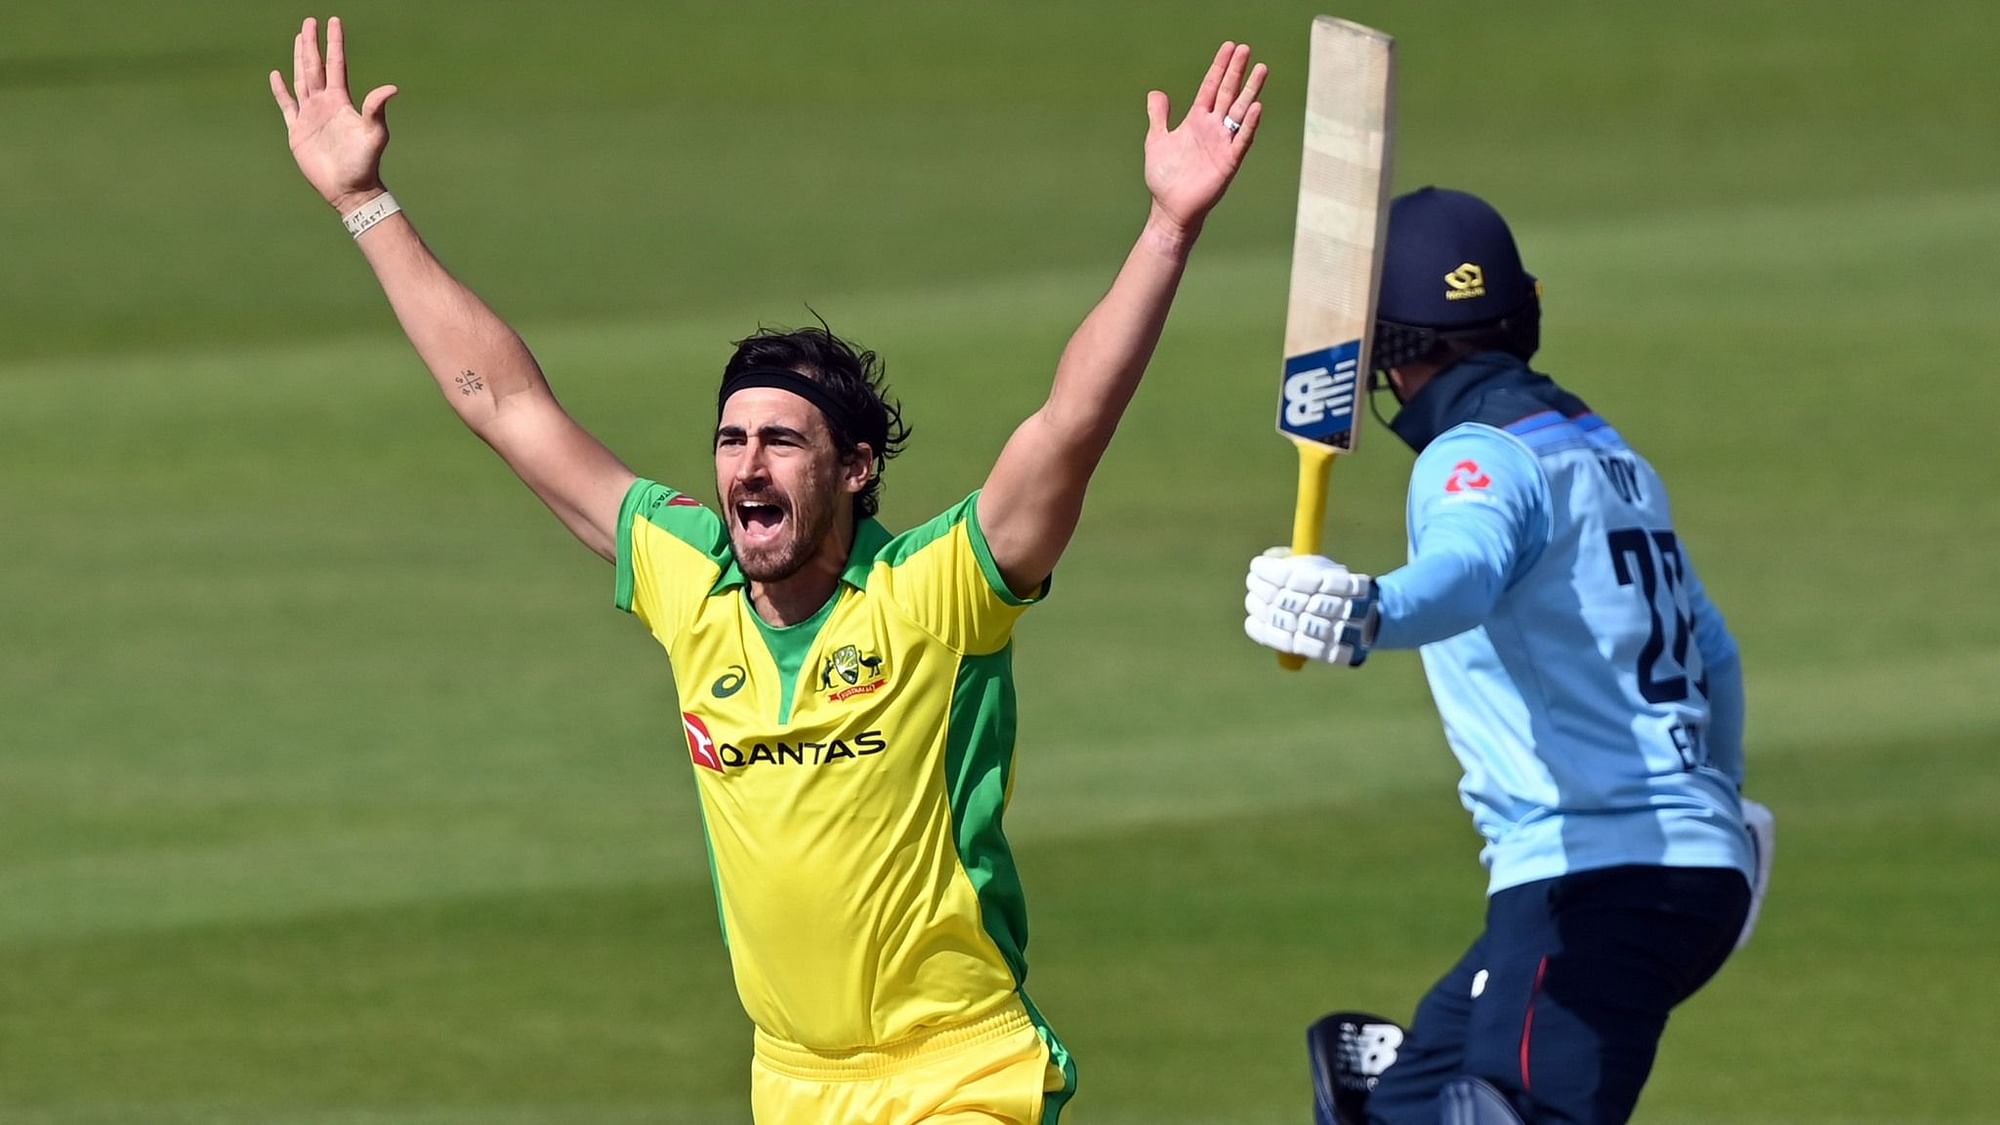 Australian fast bowler Mitchell Starc gave England’s Adil Rashid a warning for stepping out of his crease before he bowled the ball.